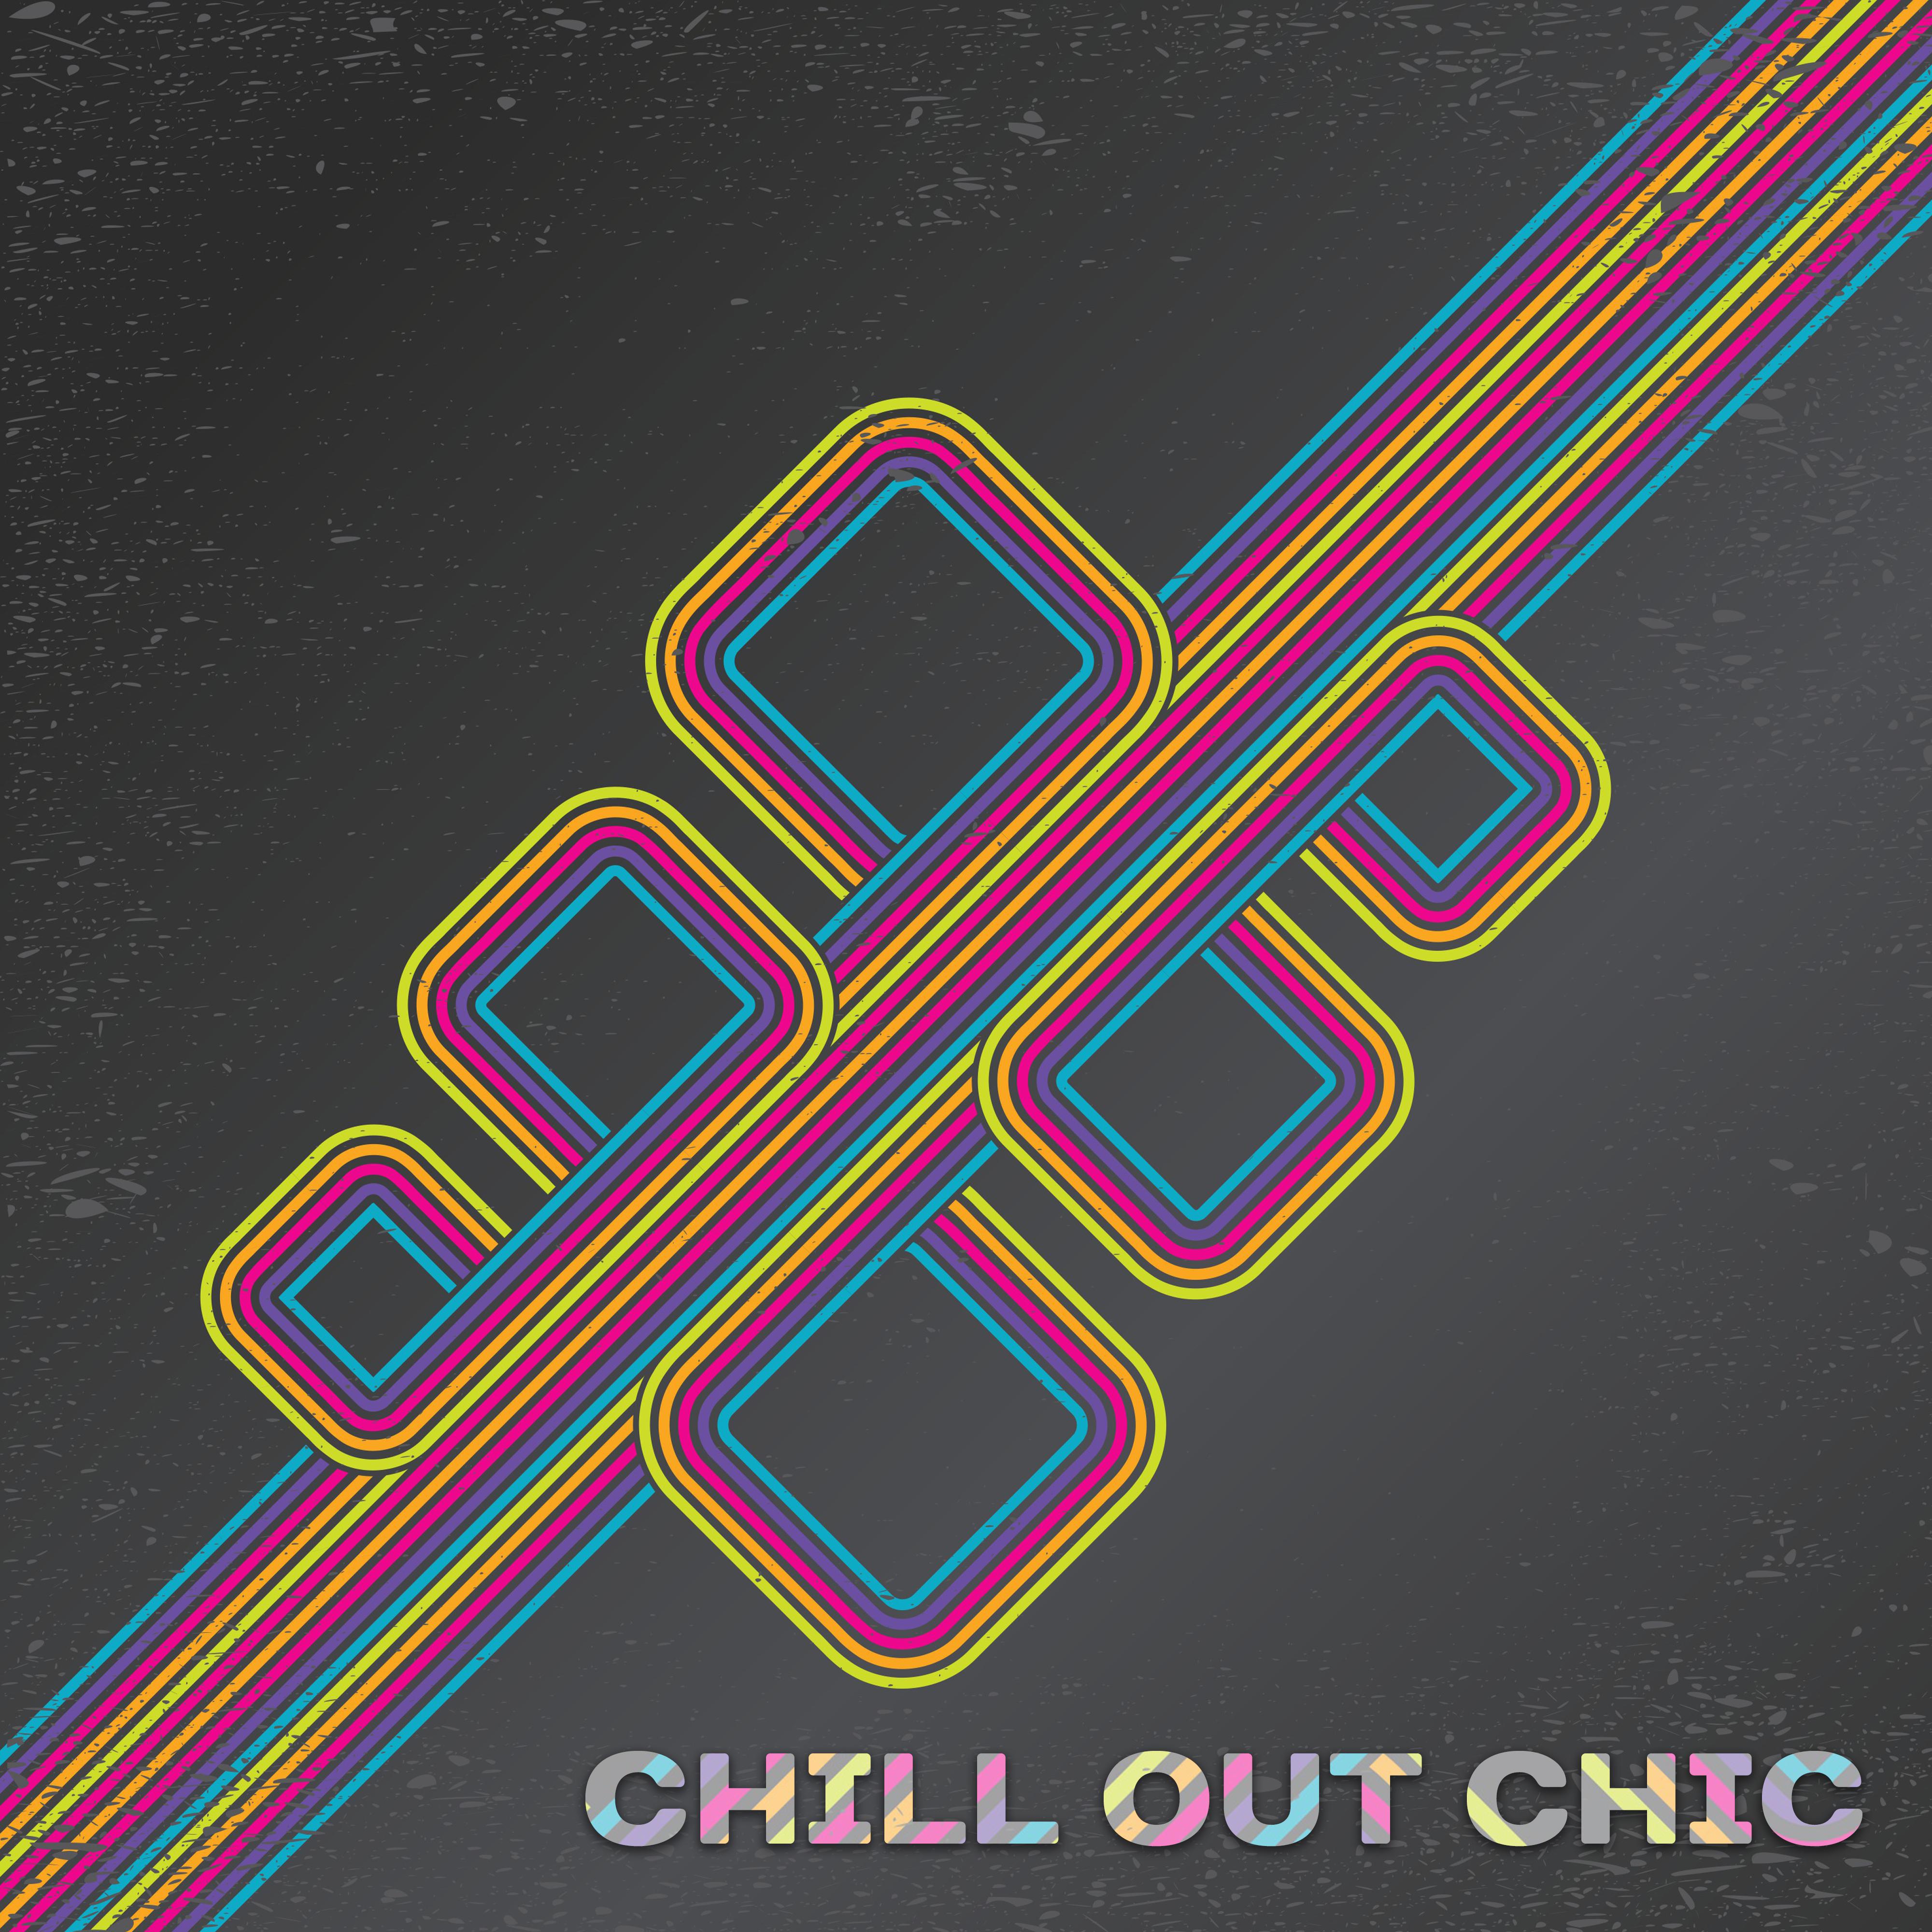 Chill Out Chic – Relax, Ibiza Dance, Summer Party, Lounge, Music Bar on the Beach